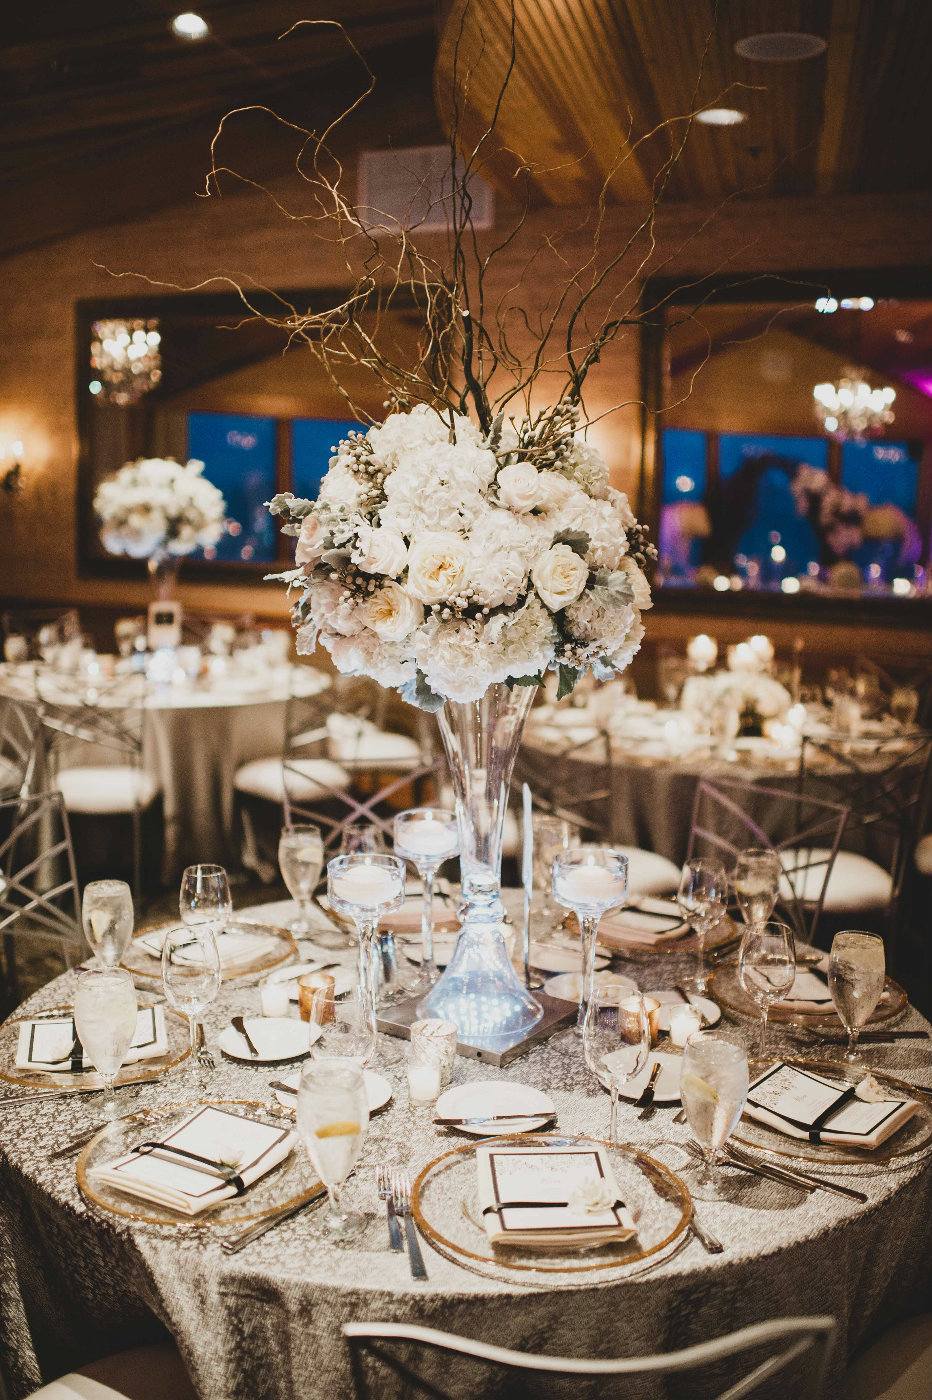 Flora Nova Design Seattle made this beautiful white flower centerpiece on a crystal vase for a winter wedding in Seattle.